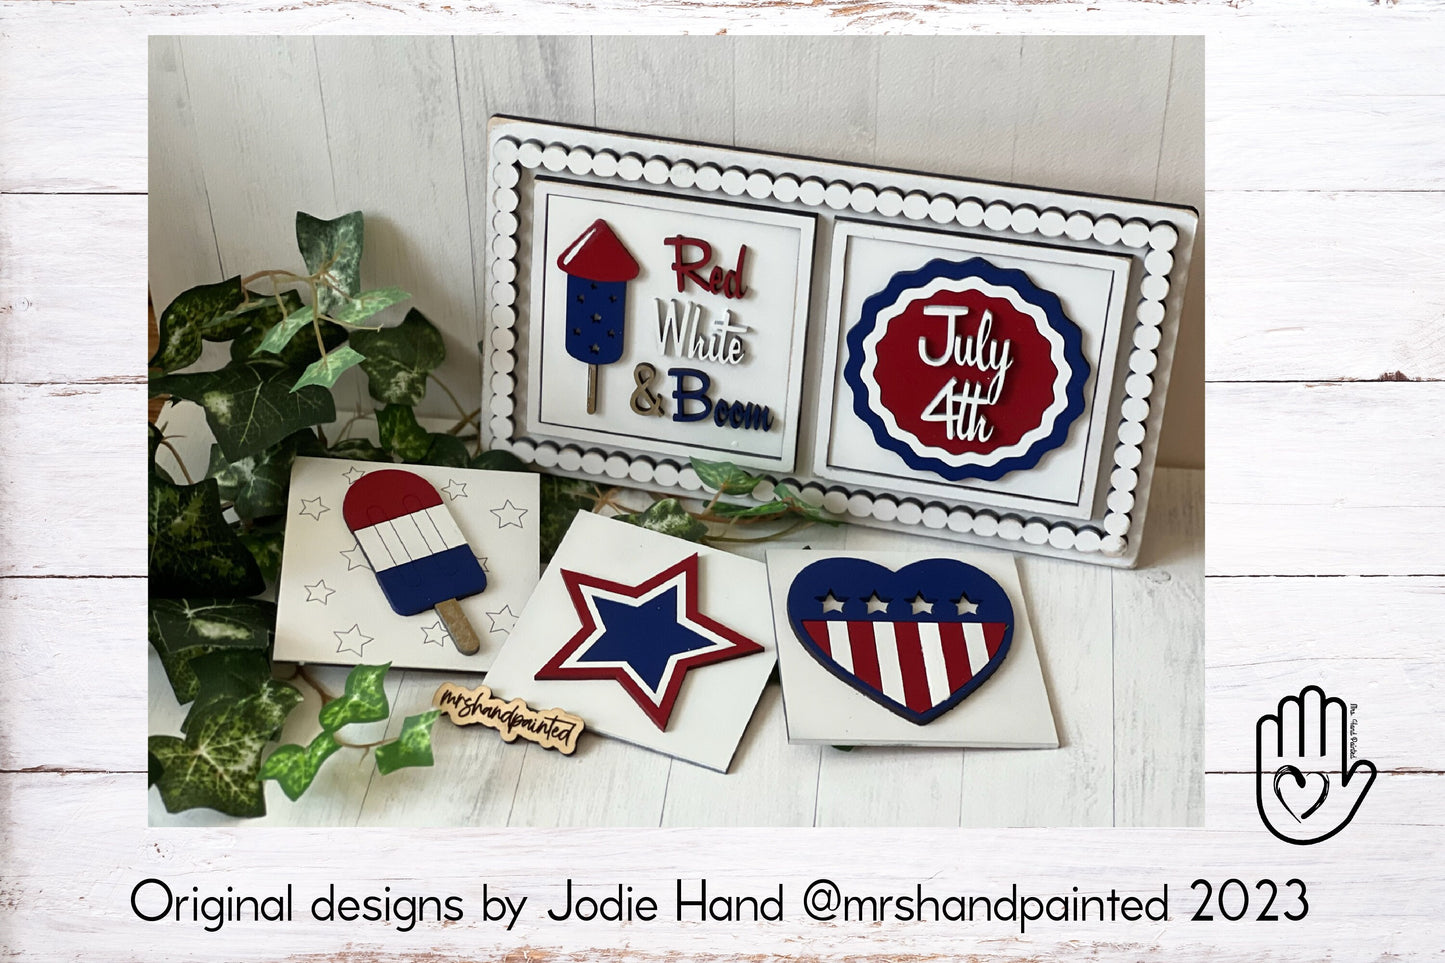 Laser Cut File - 4th of July Interchangeable Sign Tiles - Digital Download SVG, AI files